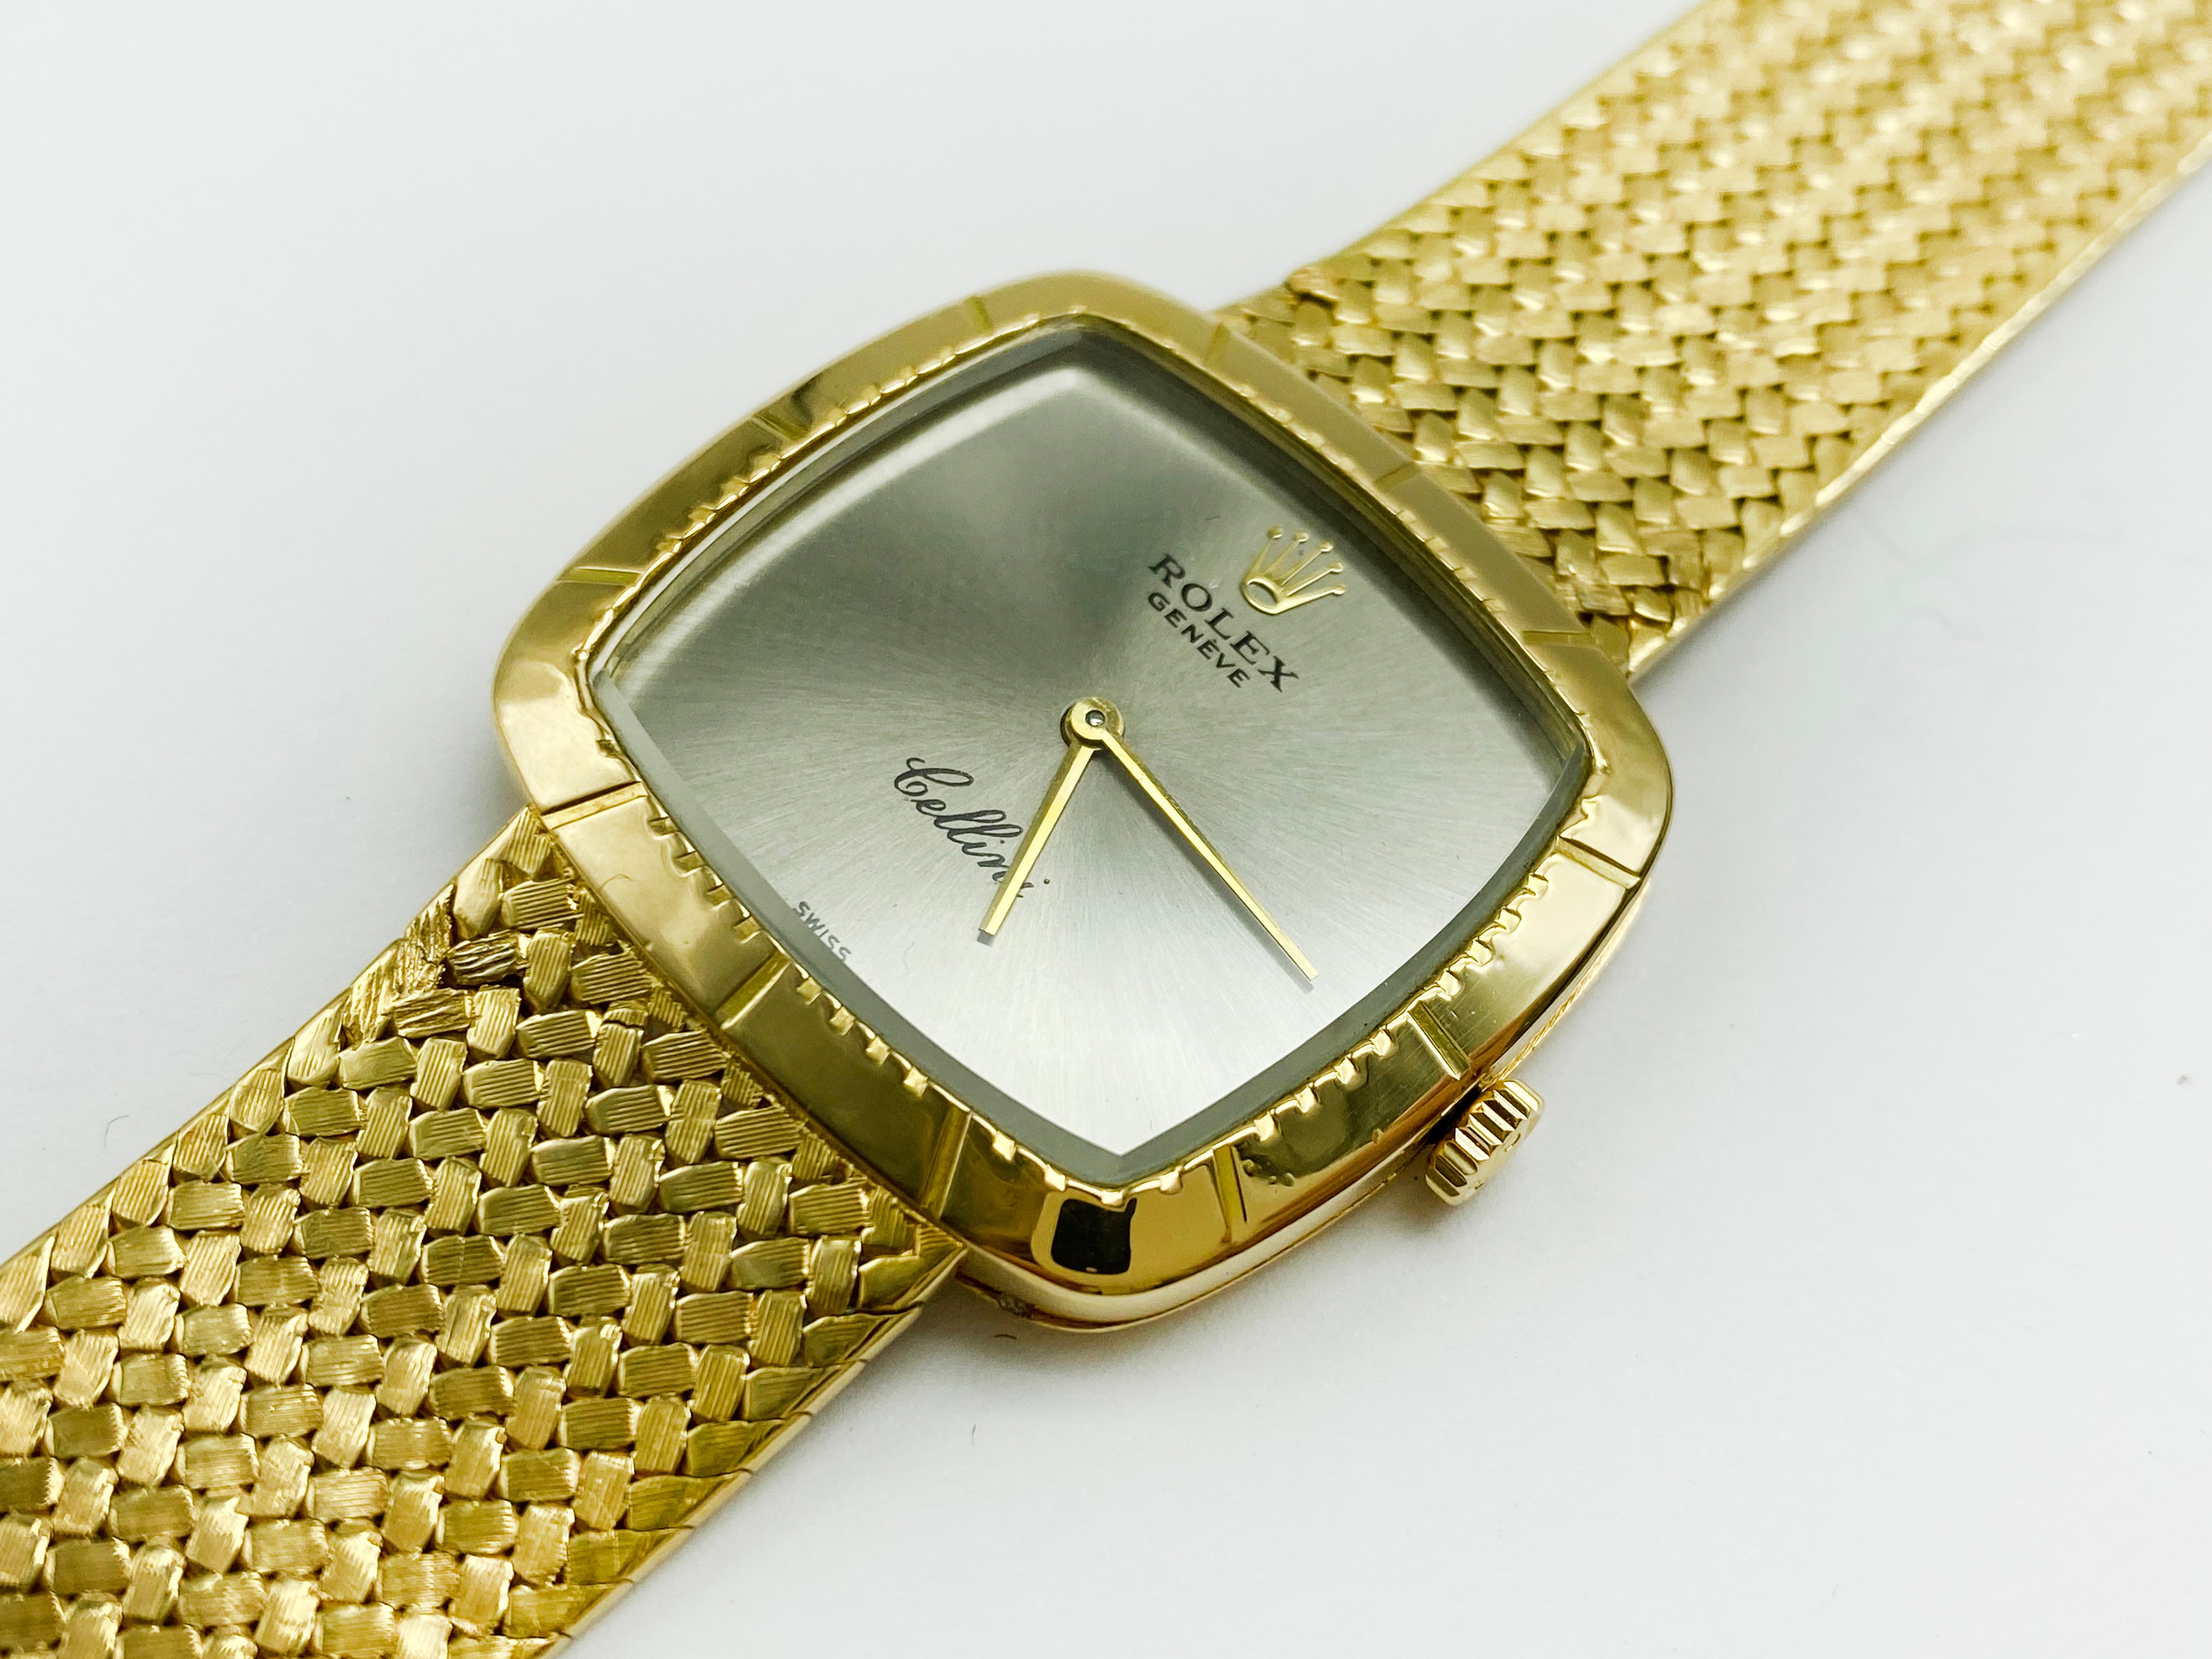 18 CARAT GOLD GENTS ROLEX CELLINI WATCH EXCELLENT CONDITION WORKING ORDER